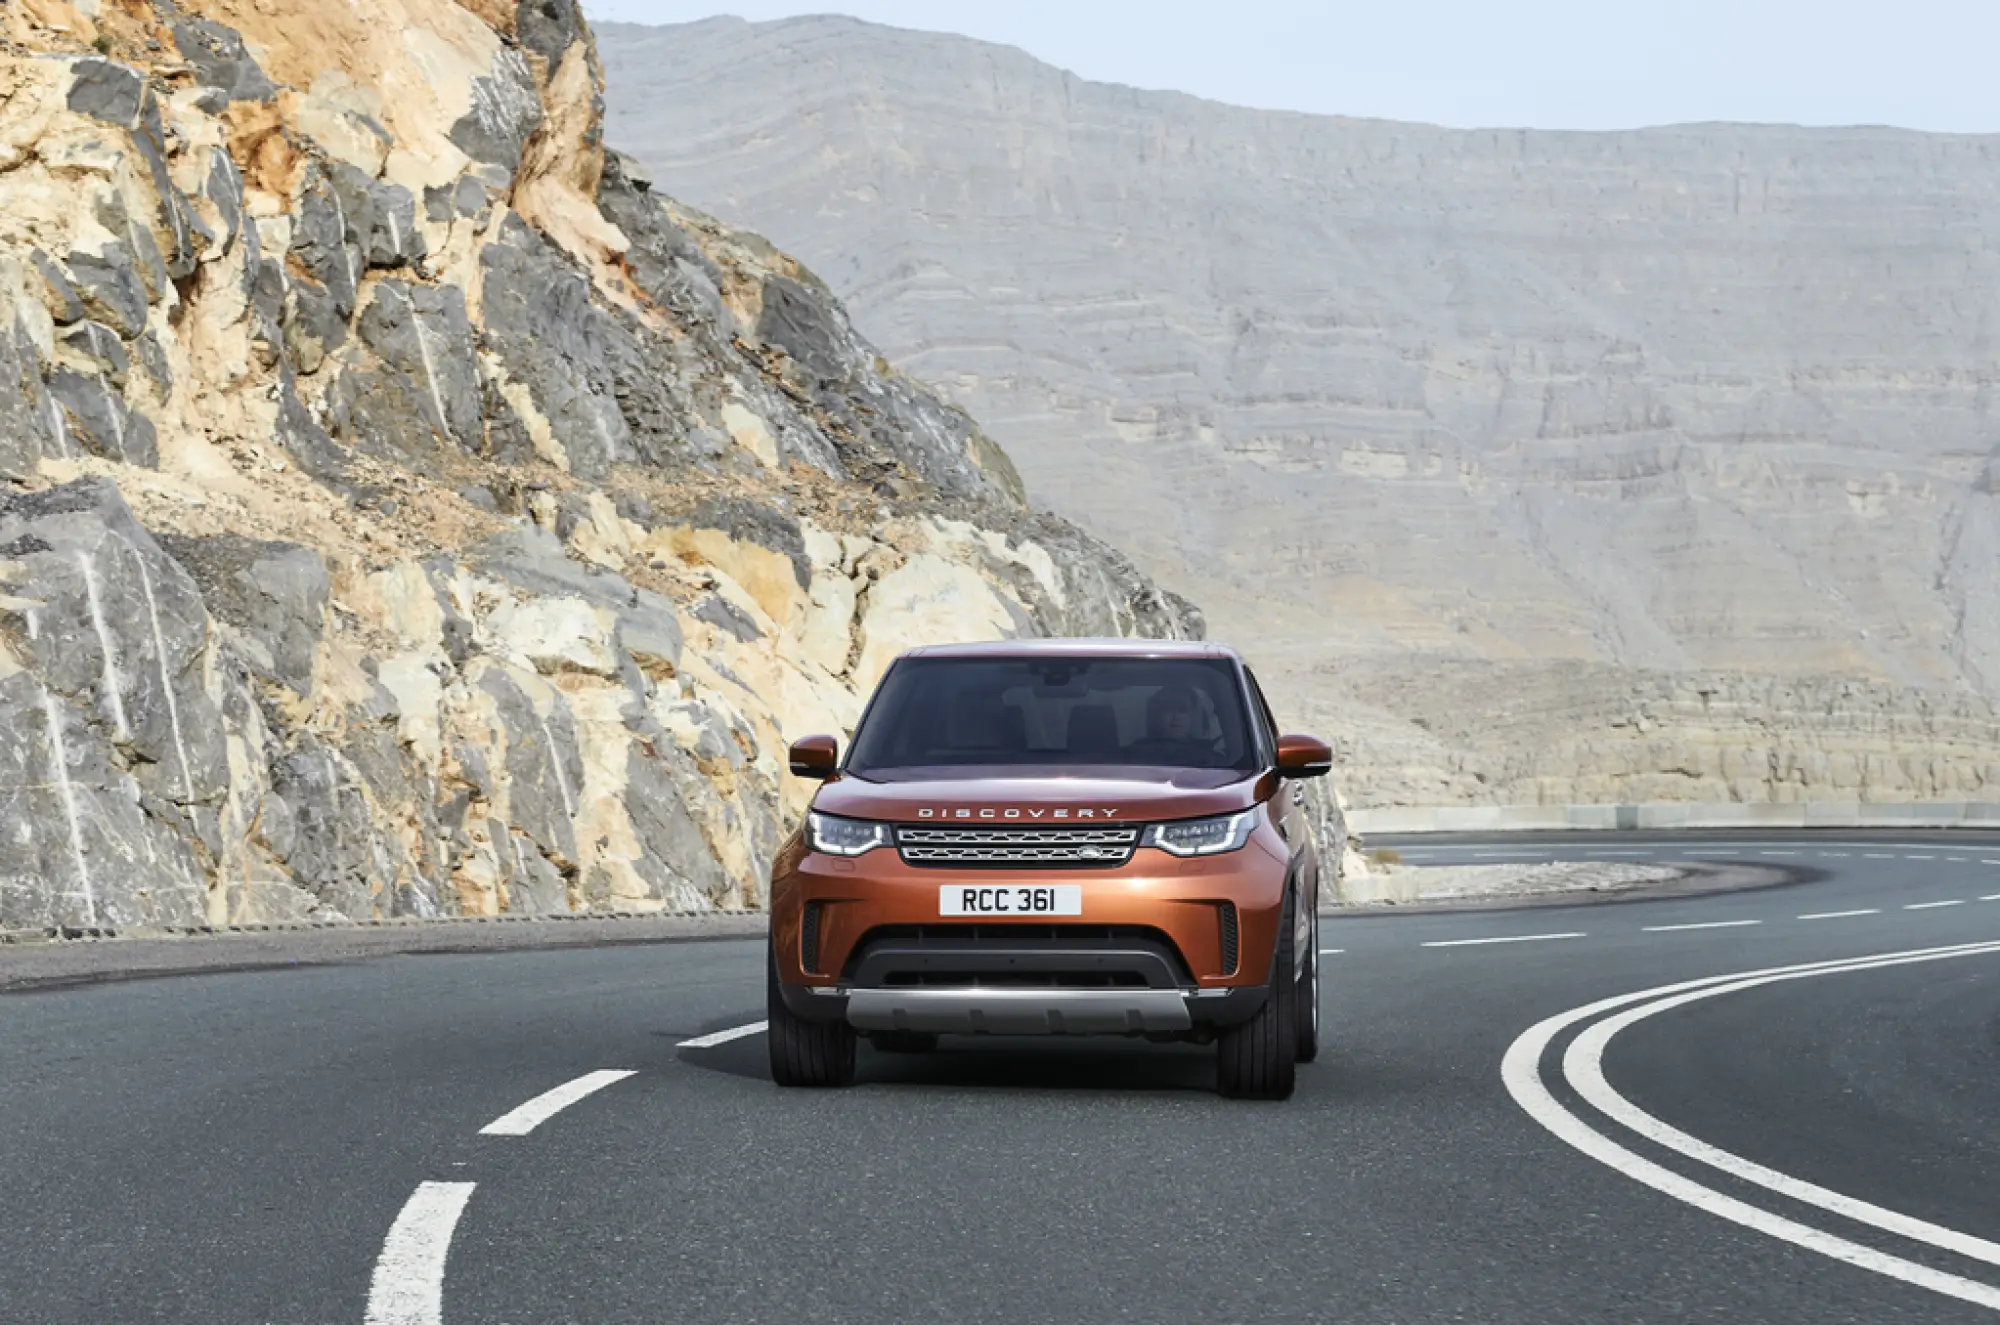 Foto stampa nuova Land Rover Discovery MY 2017 28 settembre 2016 - 11